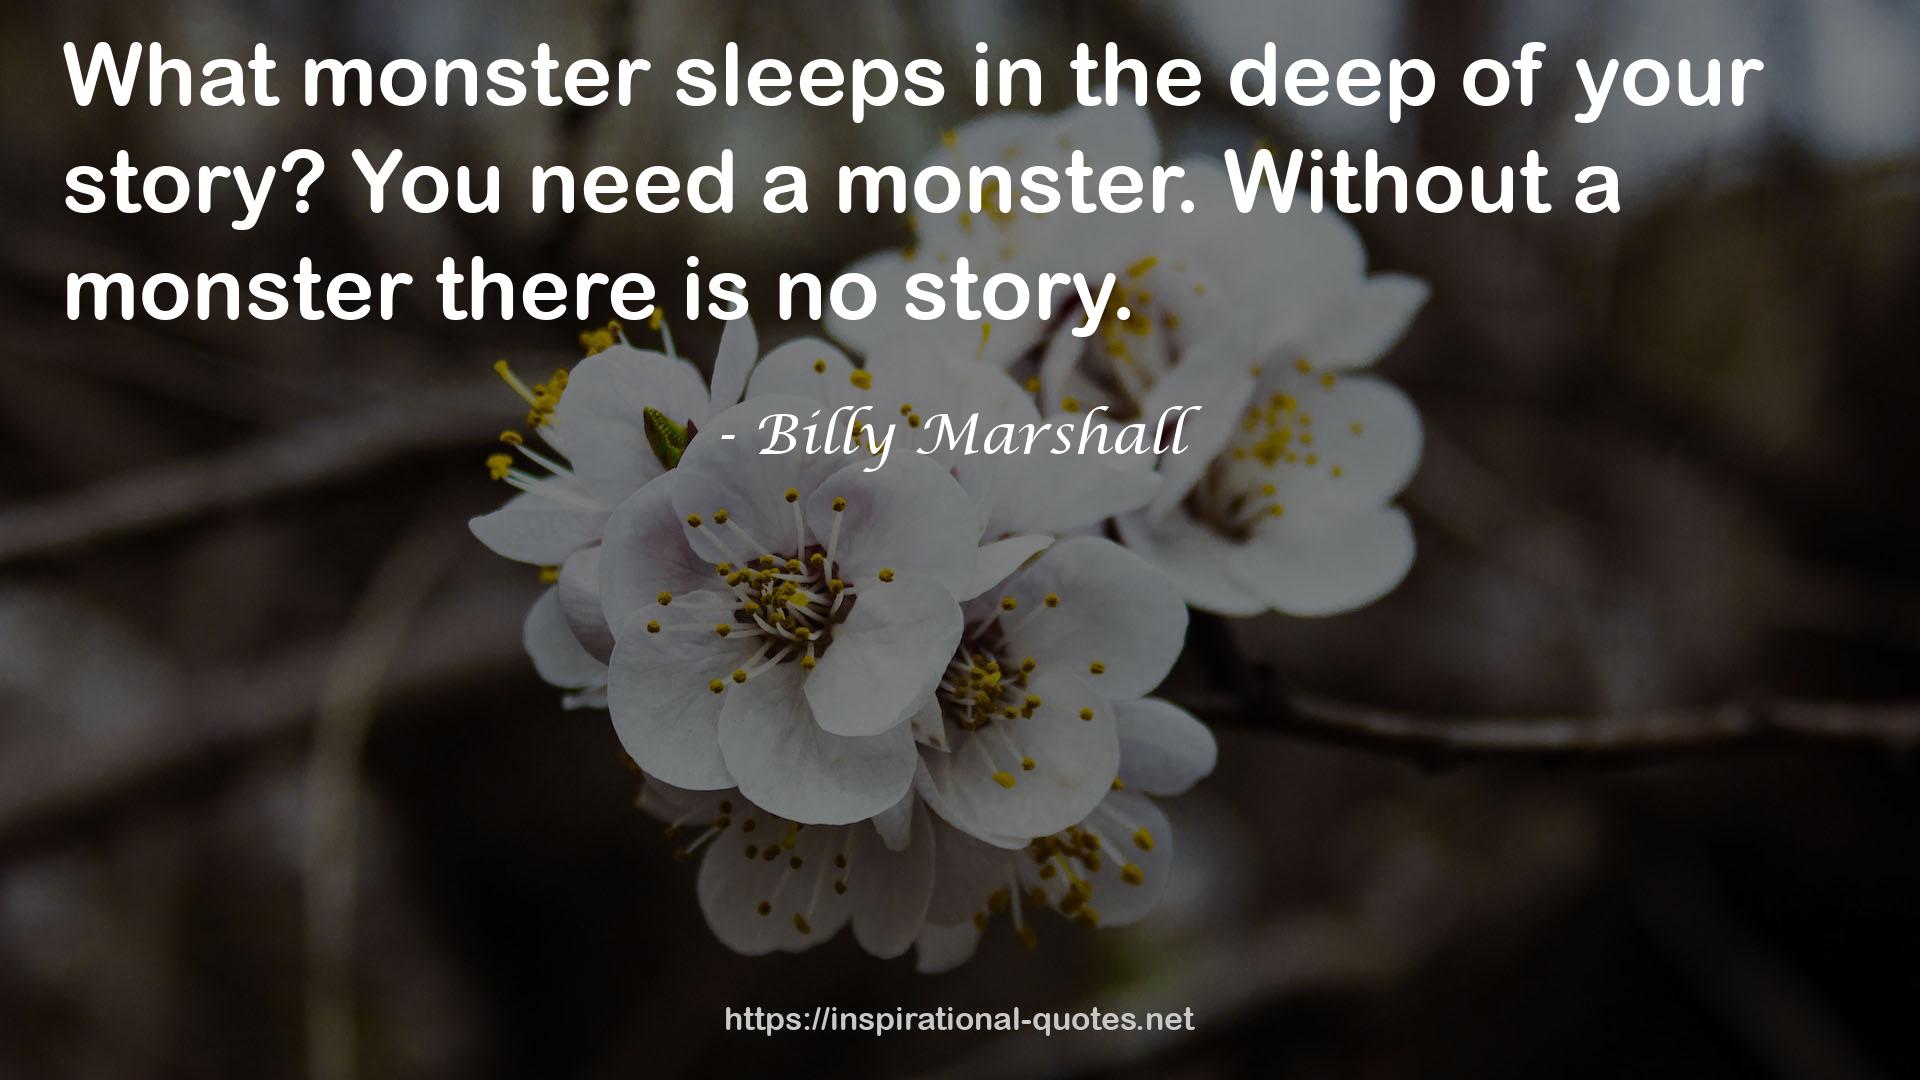 Billy Marshall QUOTES